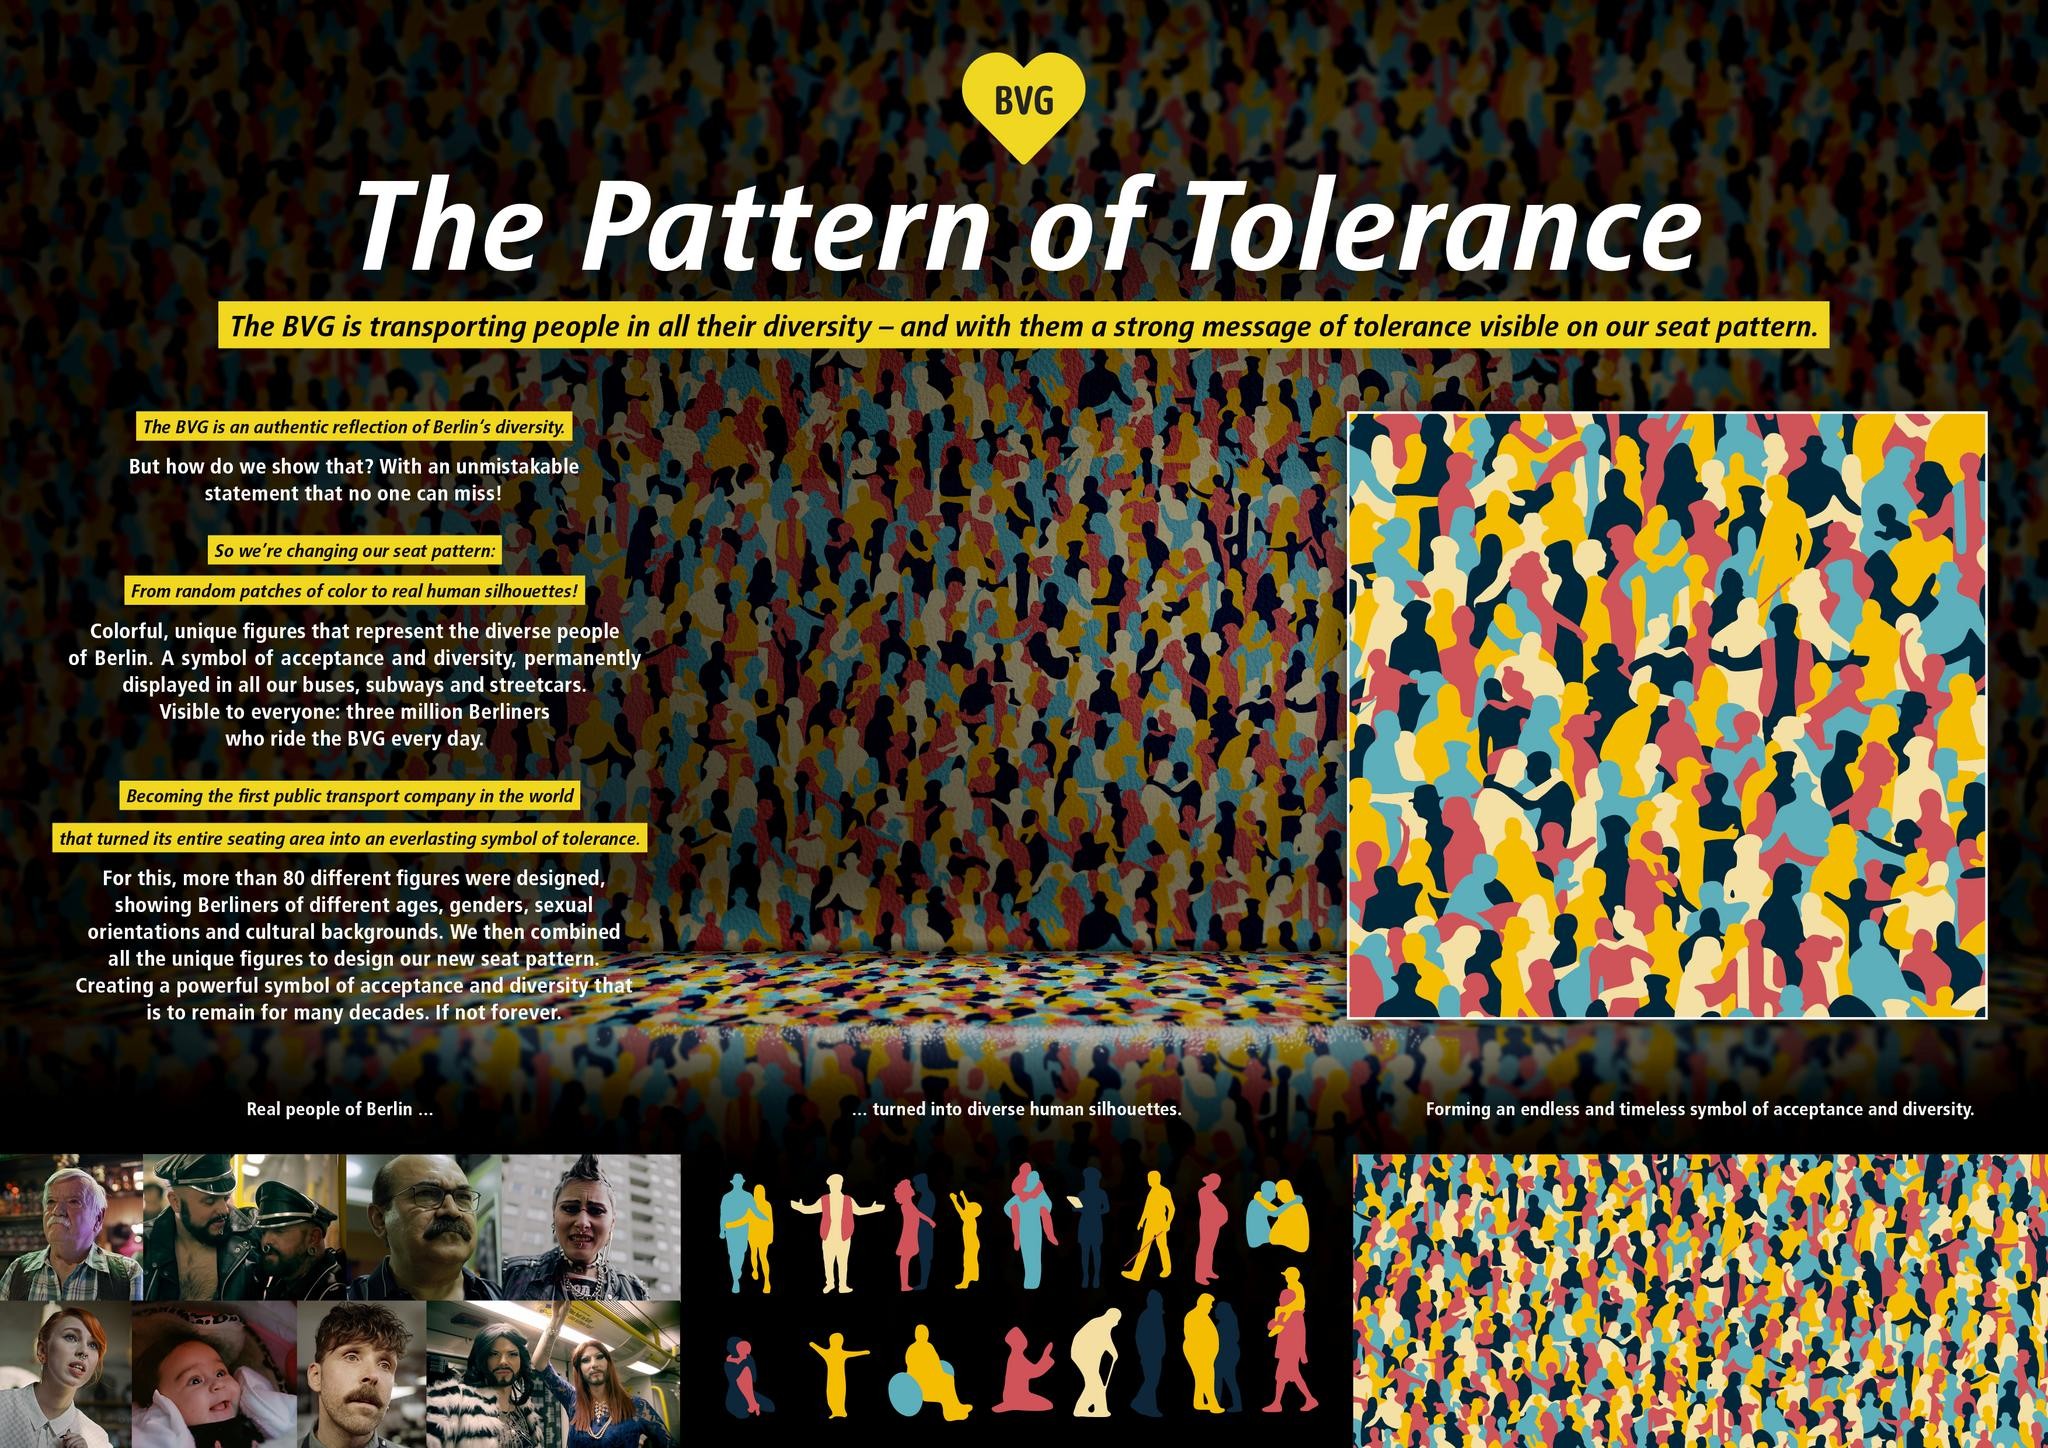 THE PATTERN OF TOLERANCE